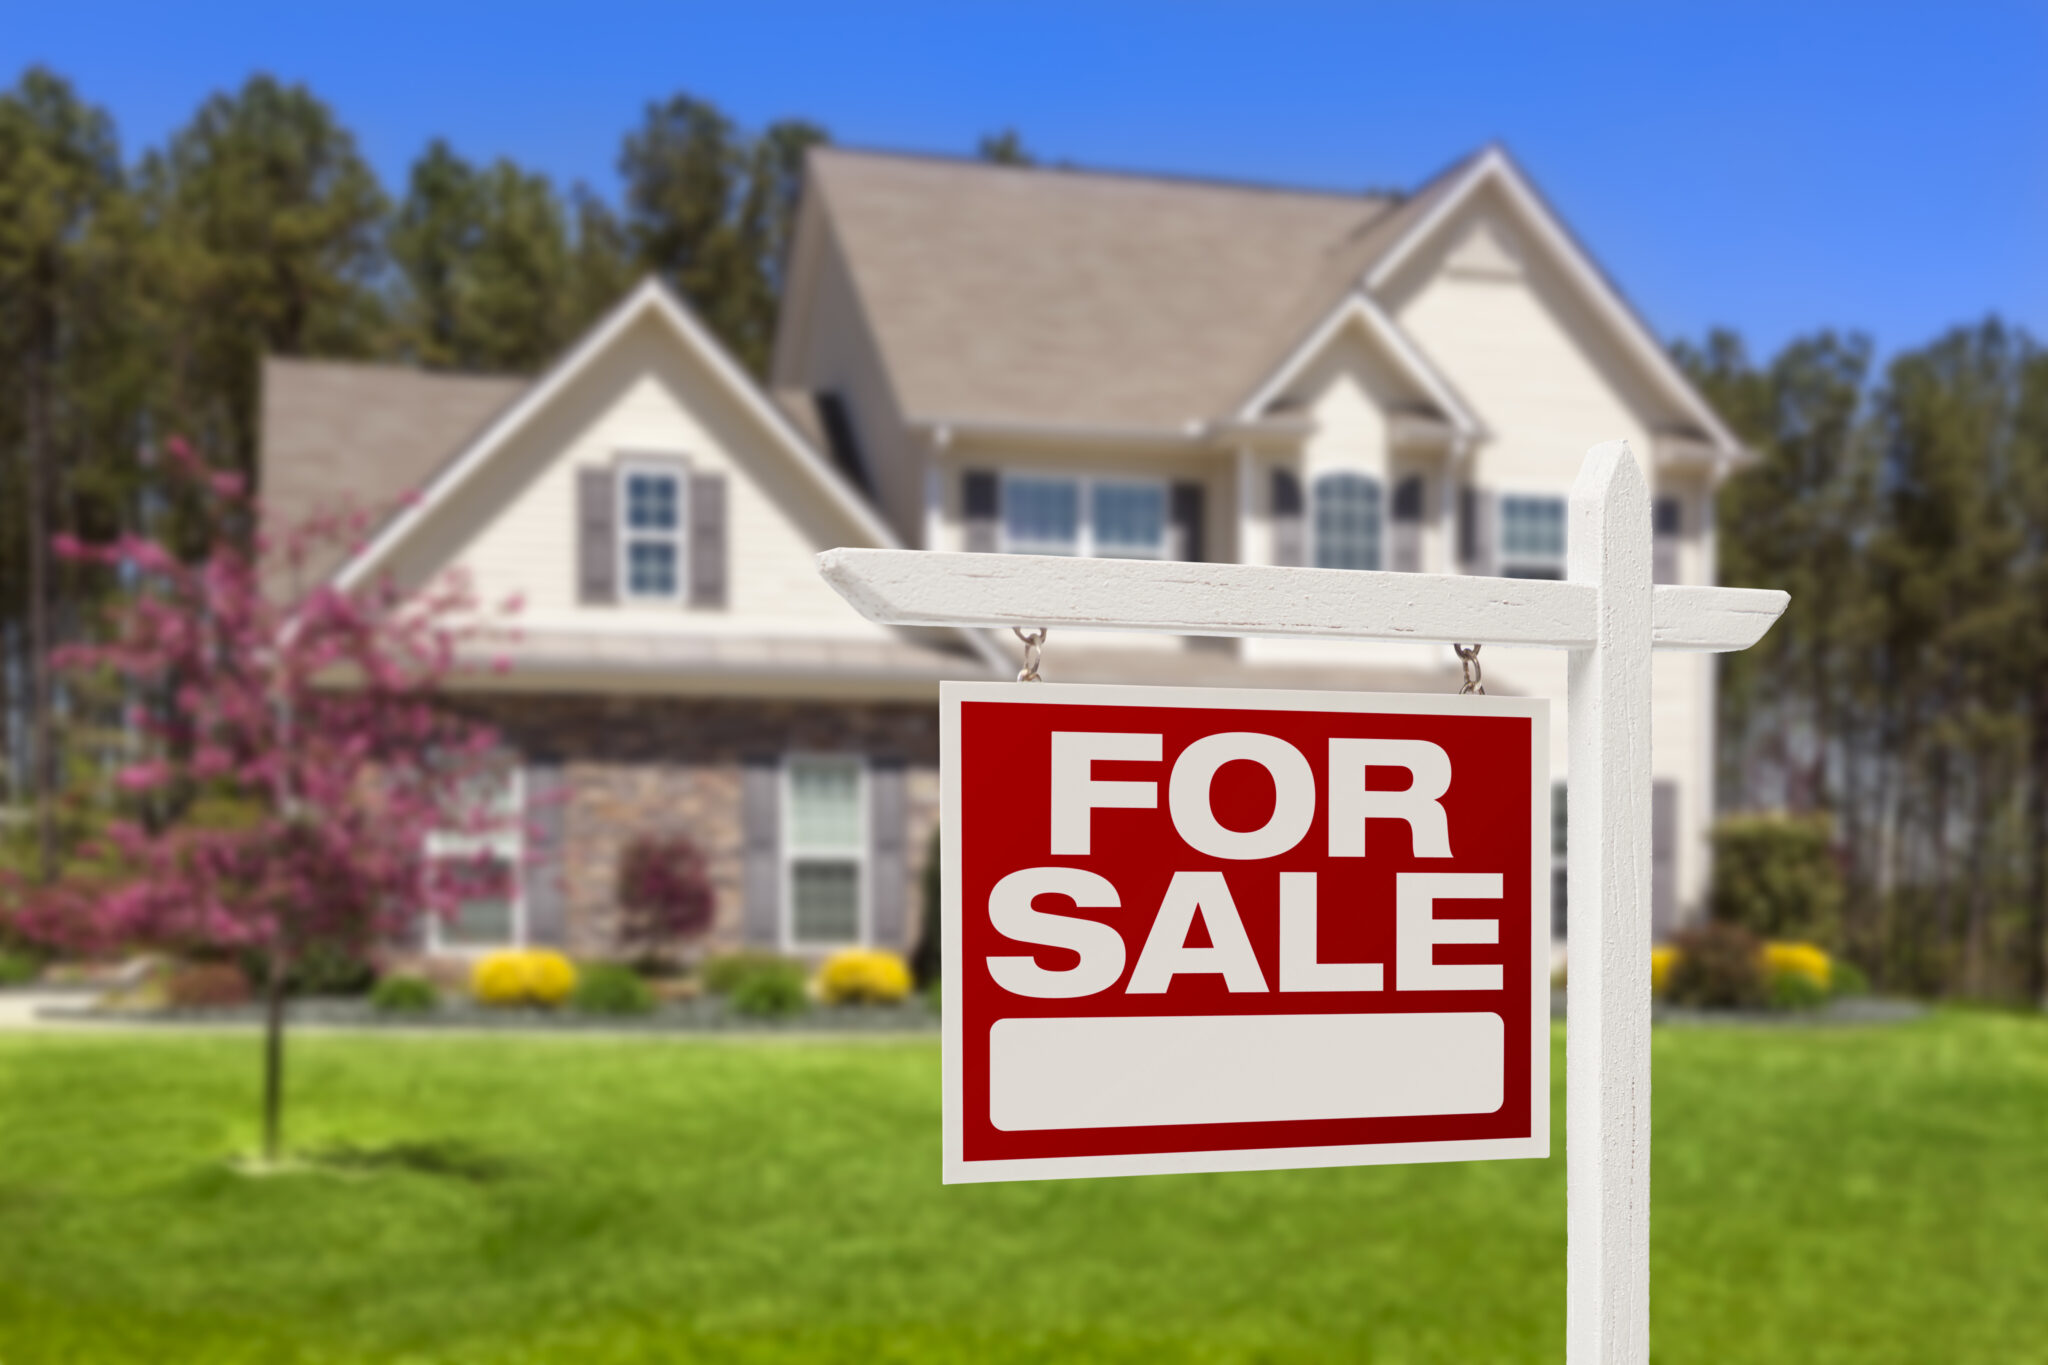 How to Get Your Property Ready For Sale.